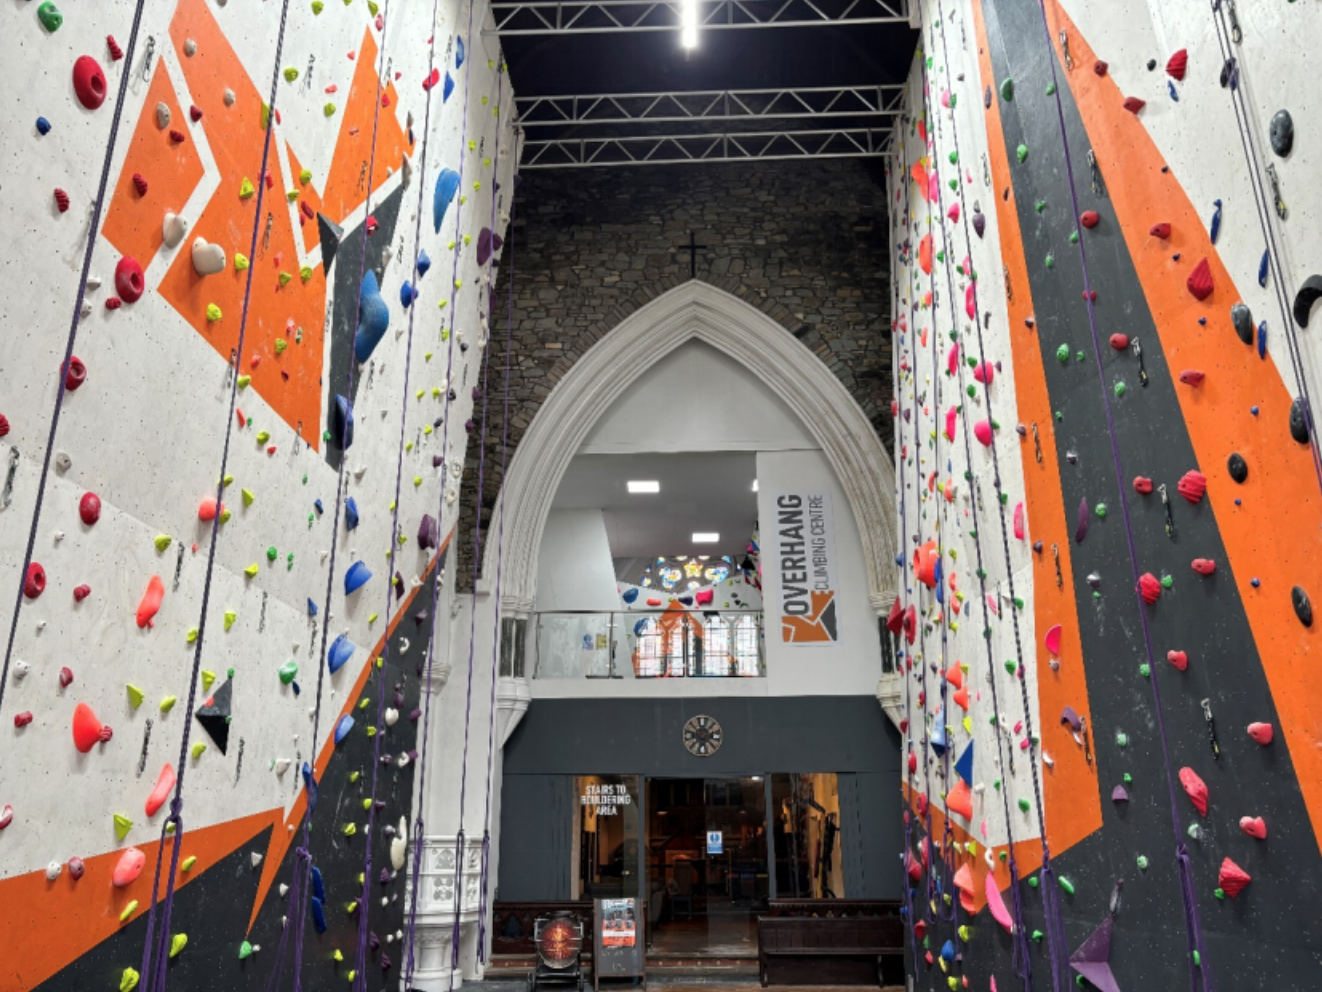 An indoor climbing center converted from a former church building in Carmarthen, Wales. /CGTN